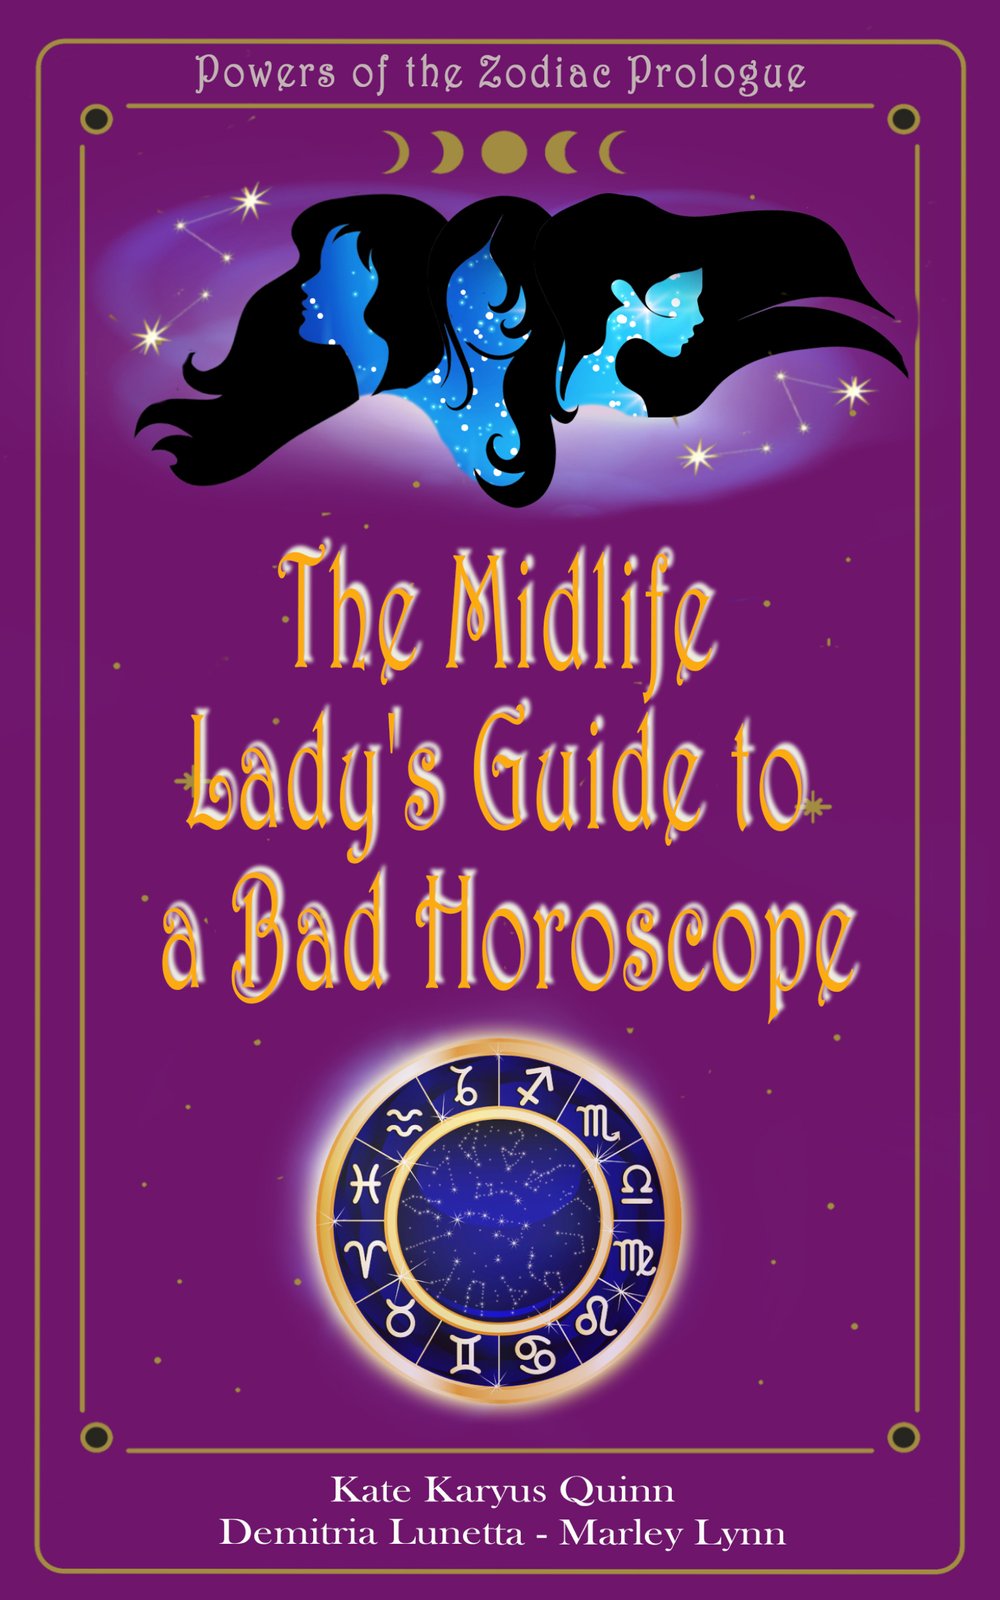 The Midlife Lady's Guide to a Bad Horoscope